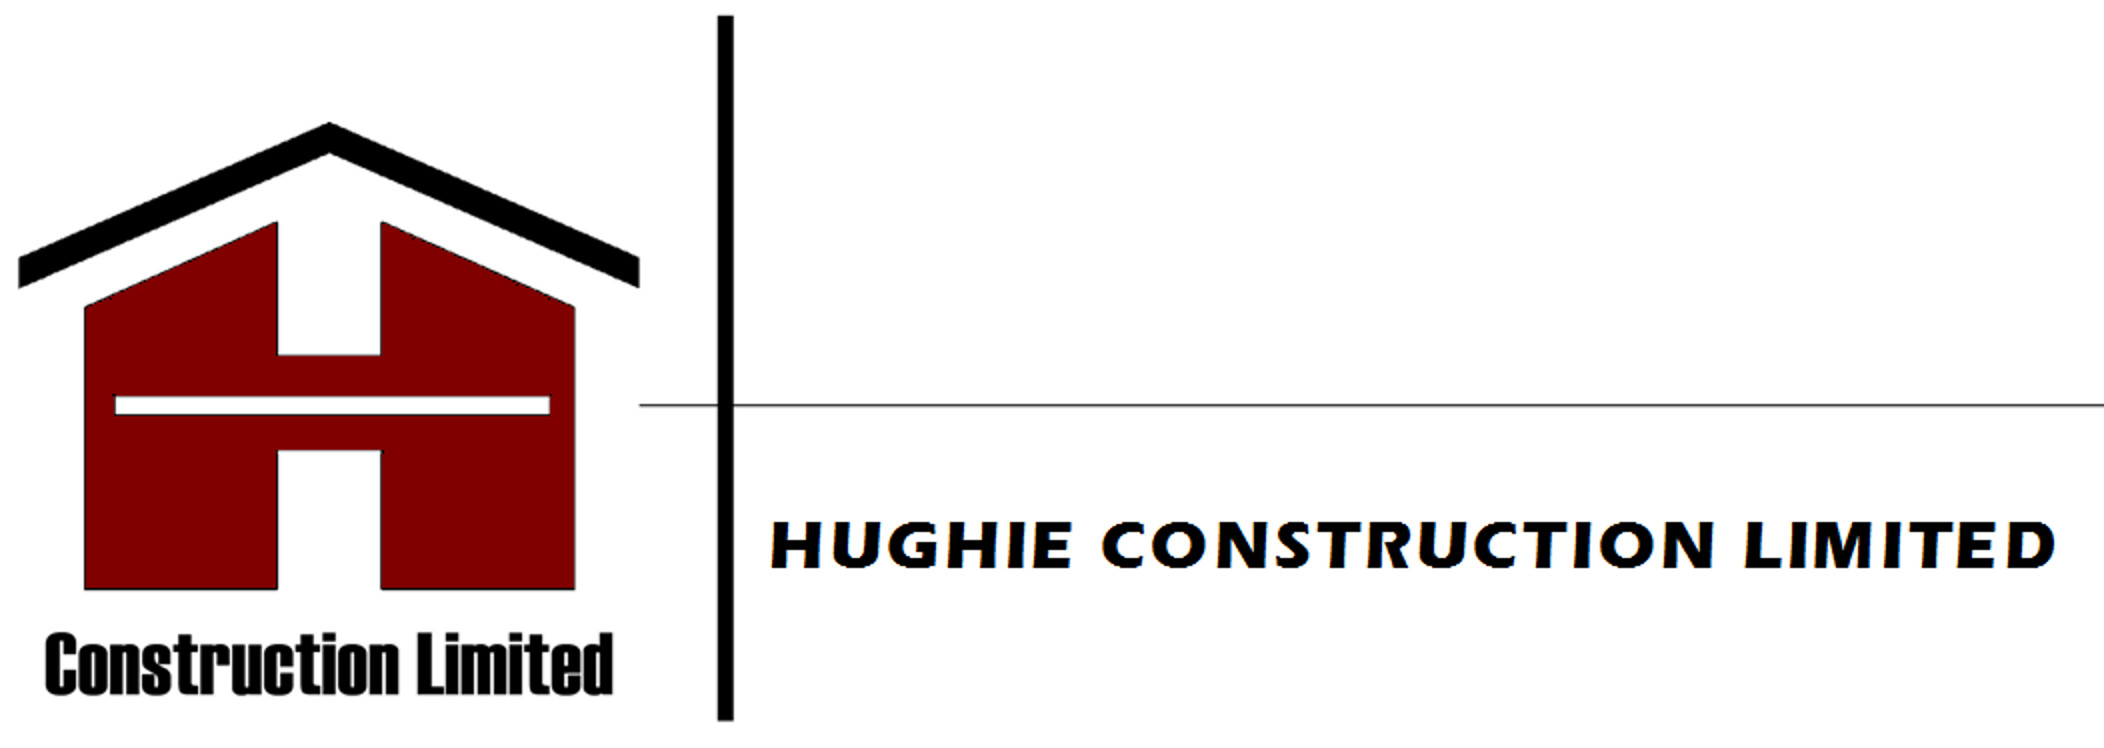 logo for Hughie Construction Limited